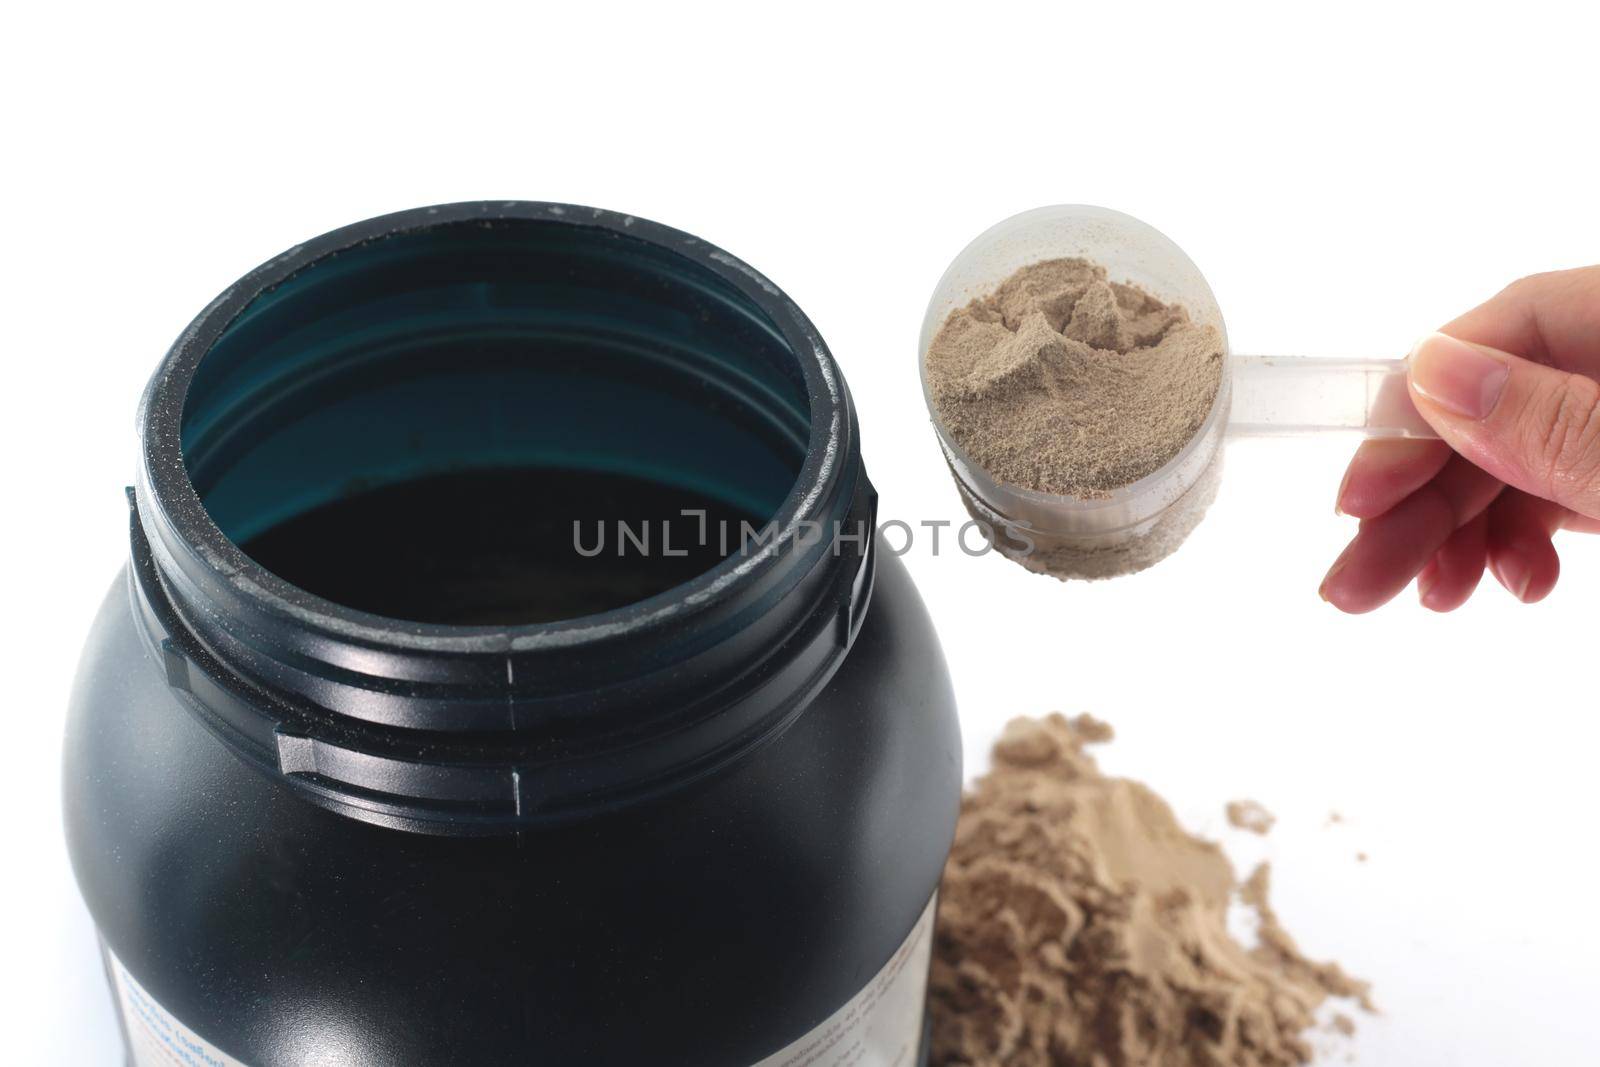 The hand raise a spoon measure Whey protein chocolate powder for fitness and bodybuilding gaining muscle.